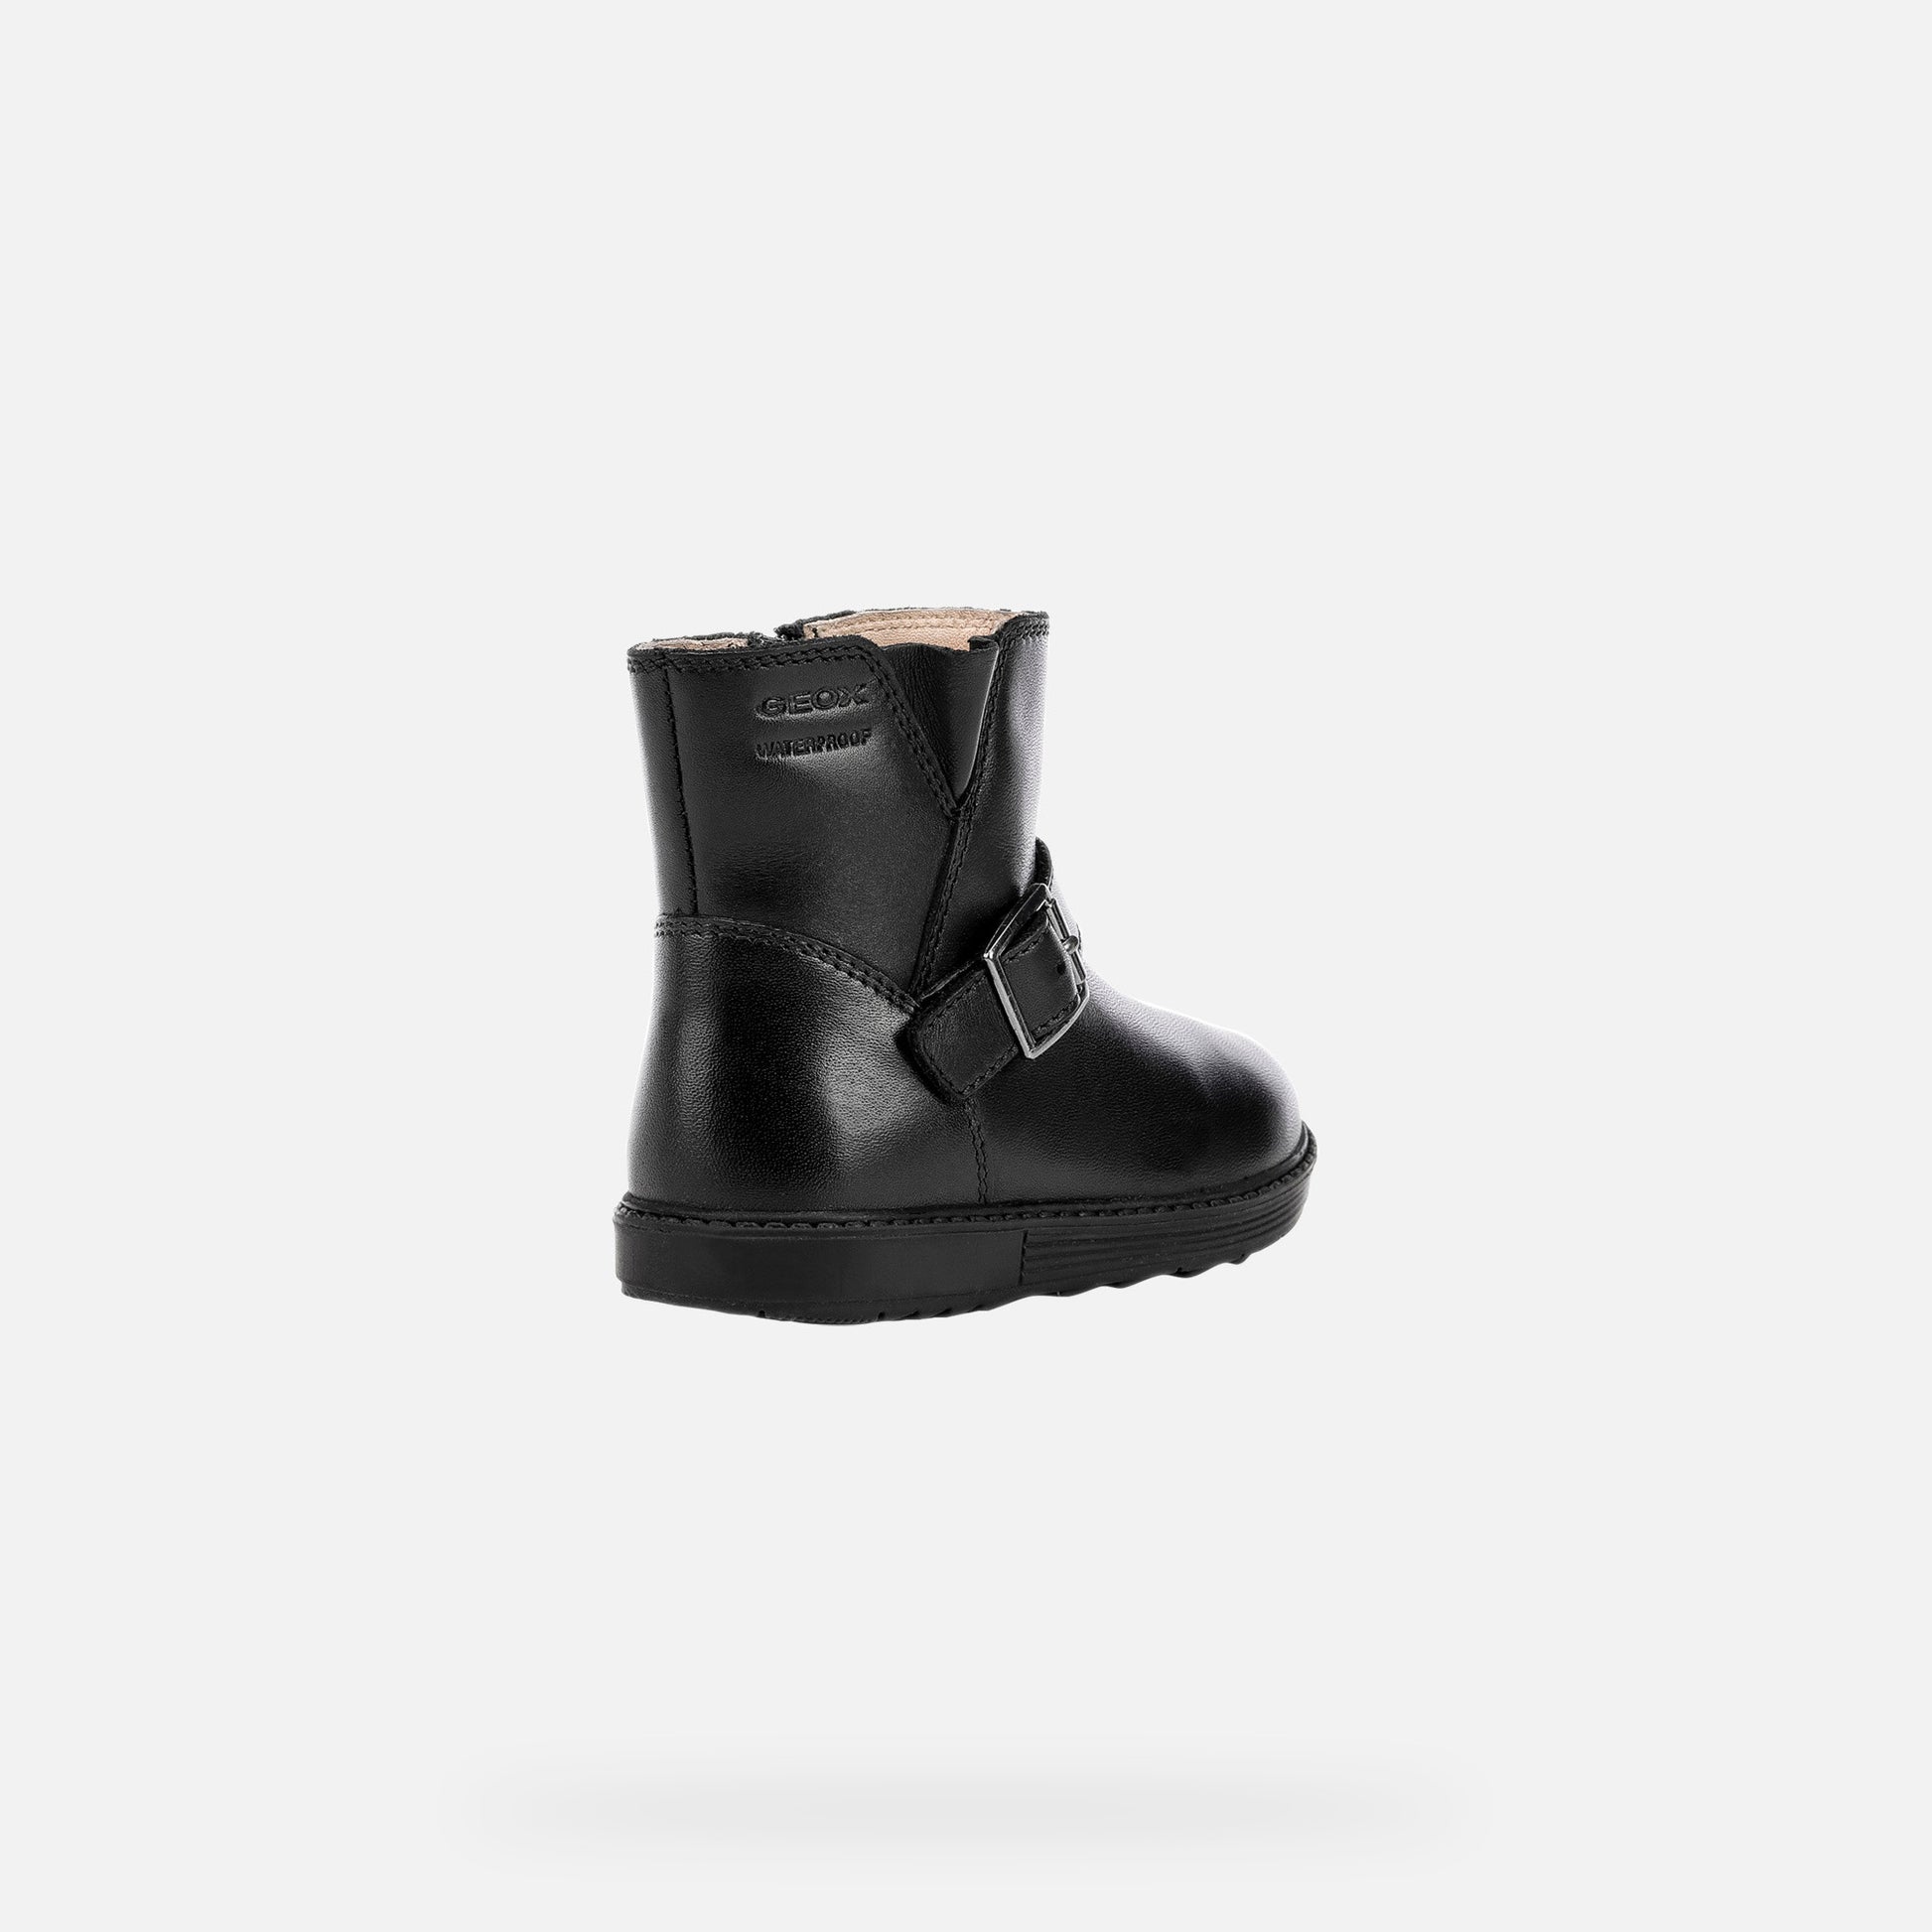 A girls waterproof ankle boot by Geox, style is Hynde in Black leather with zip side fastening and buckle across the top to alter width. Back view.